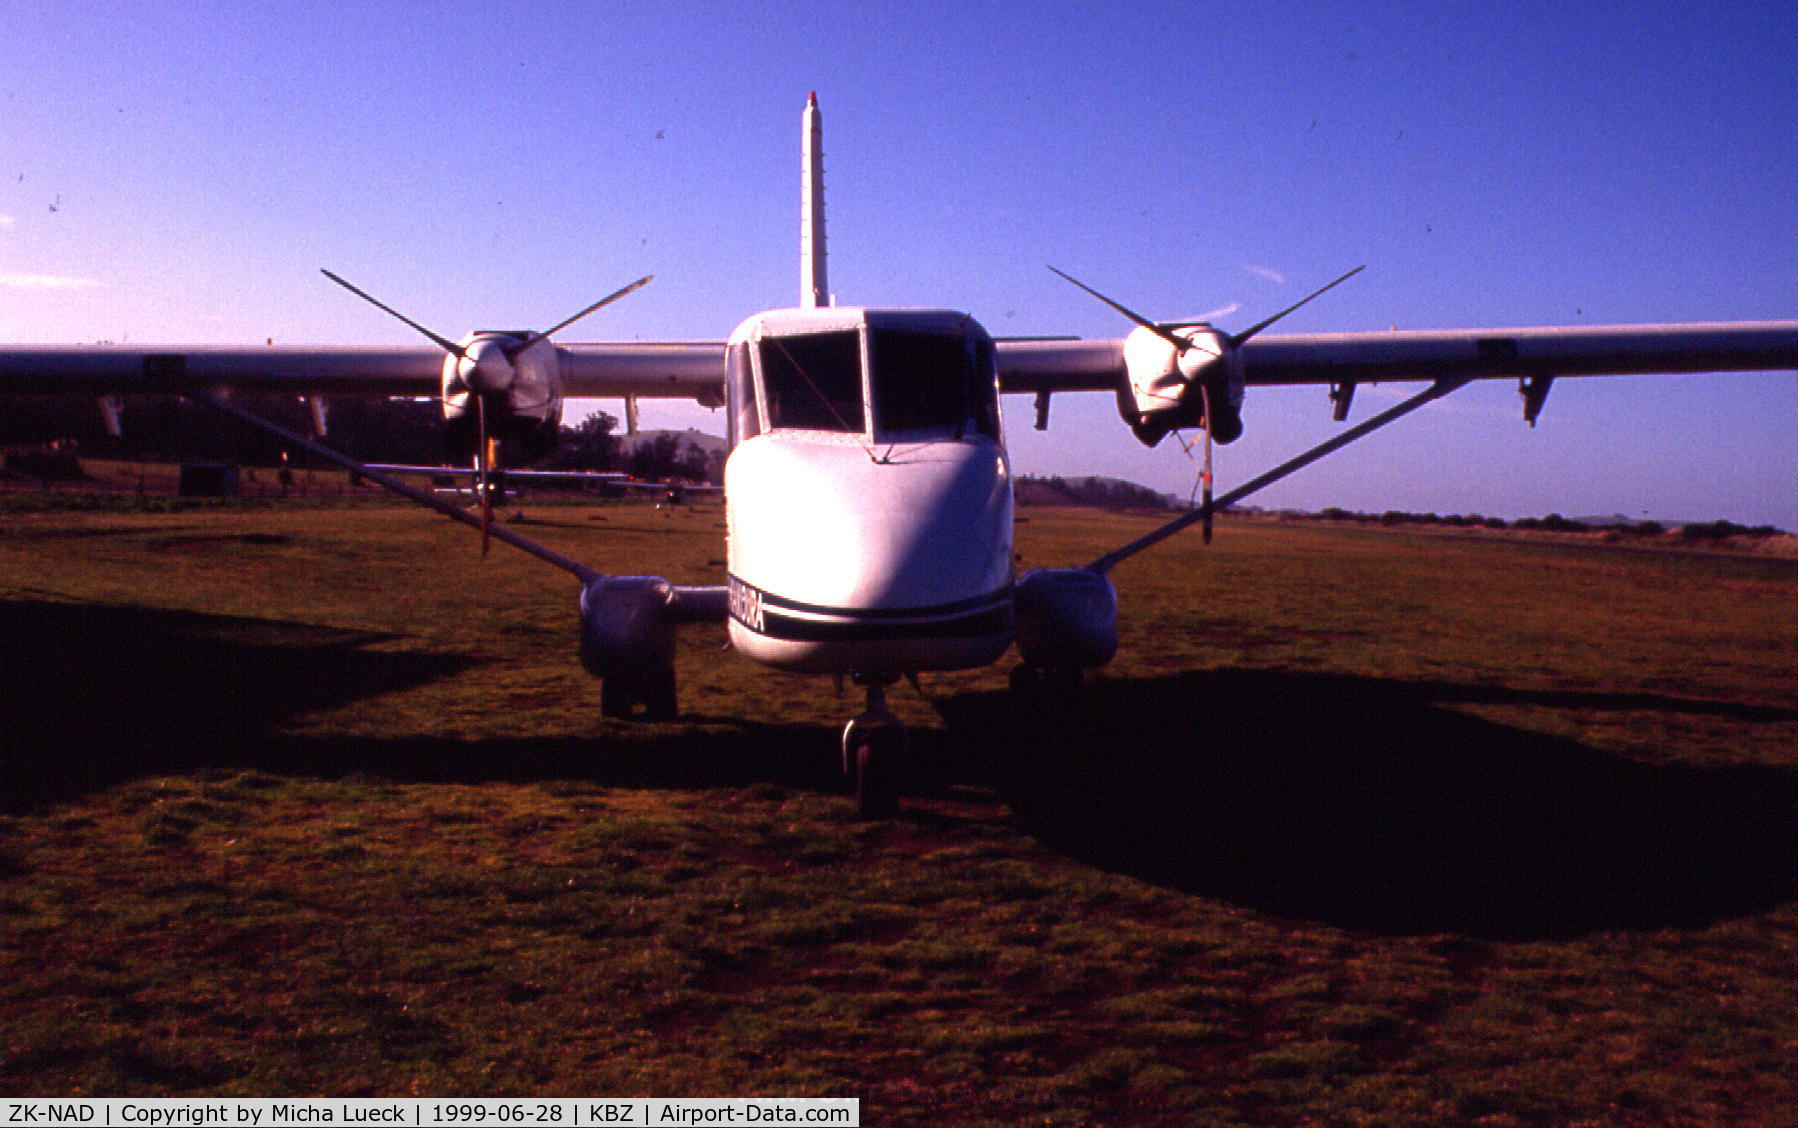 ZK-NAD, 1996 GAF N24A Nomad C/N N24A-30, Ex Flying Doctor Service aircraft, now used for local whale watching flights